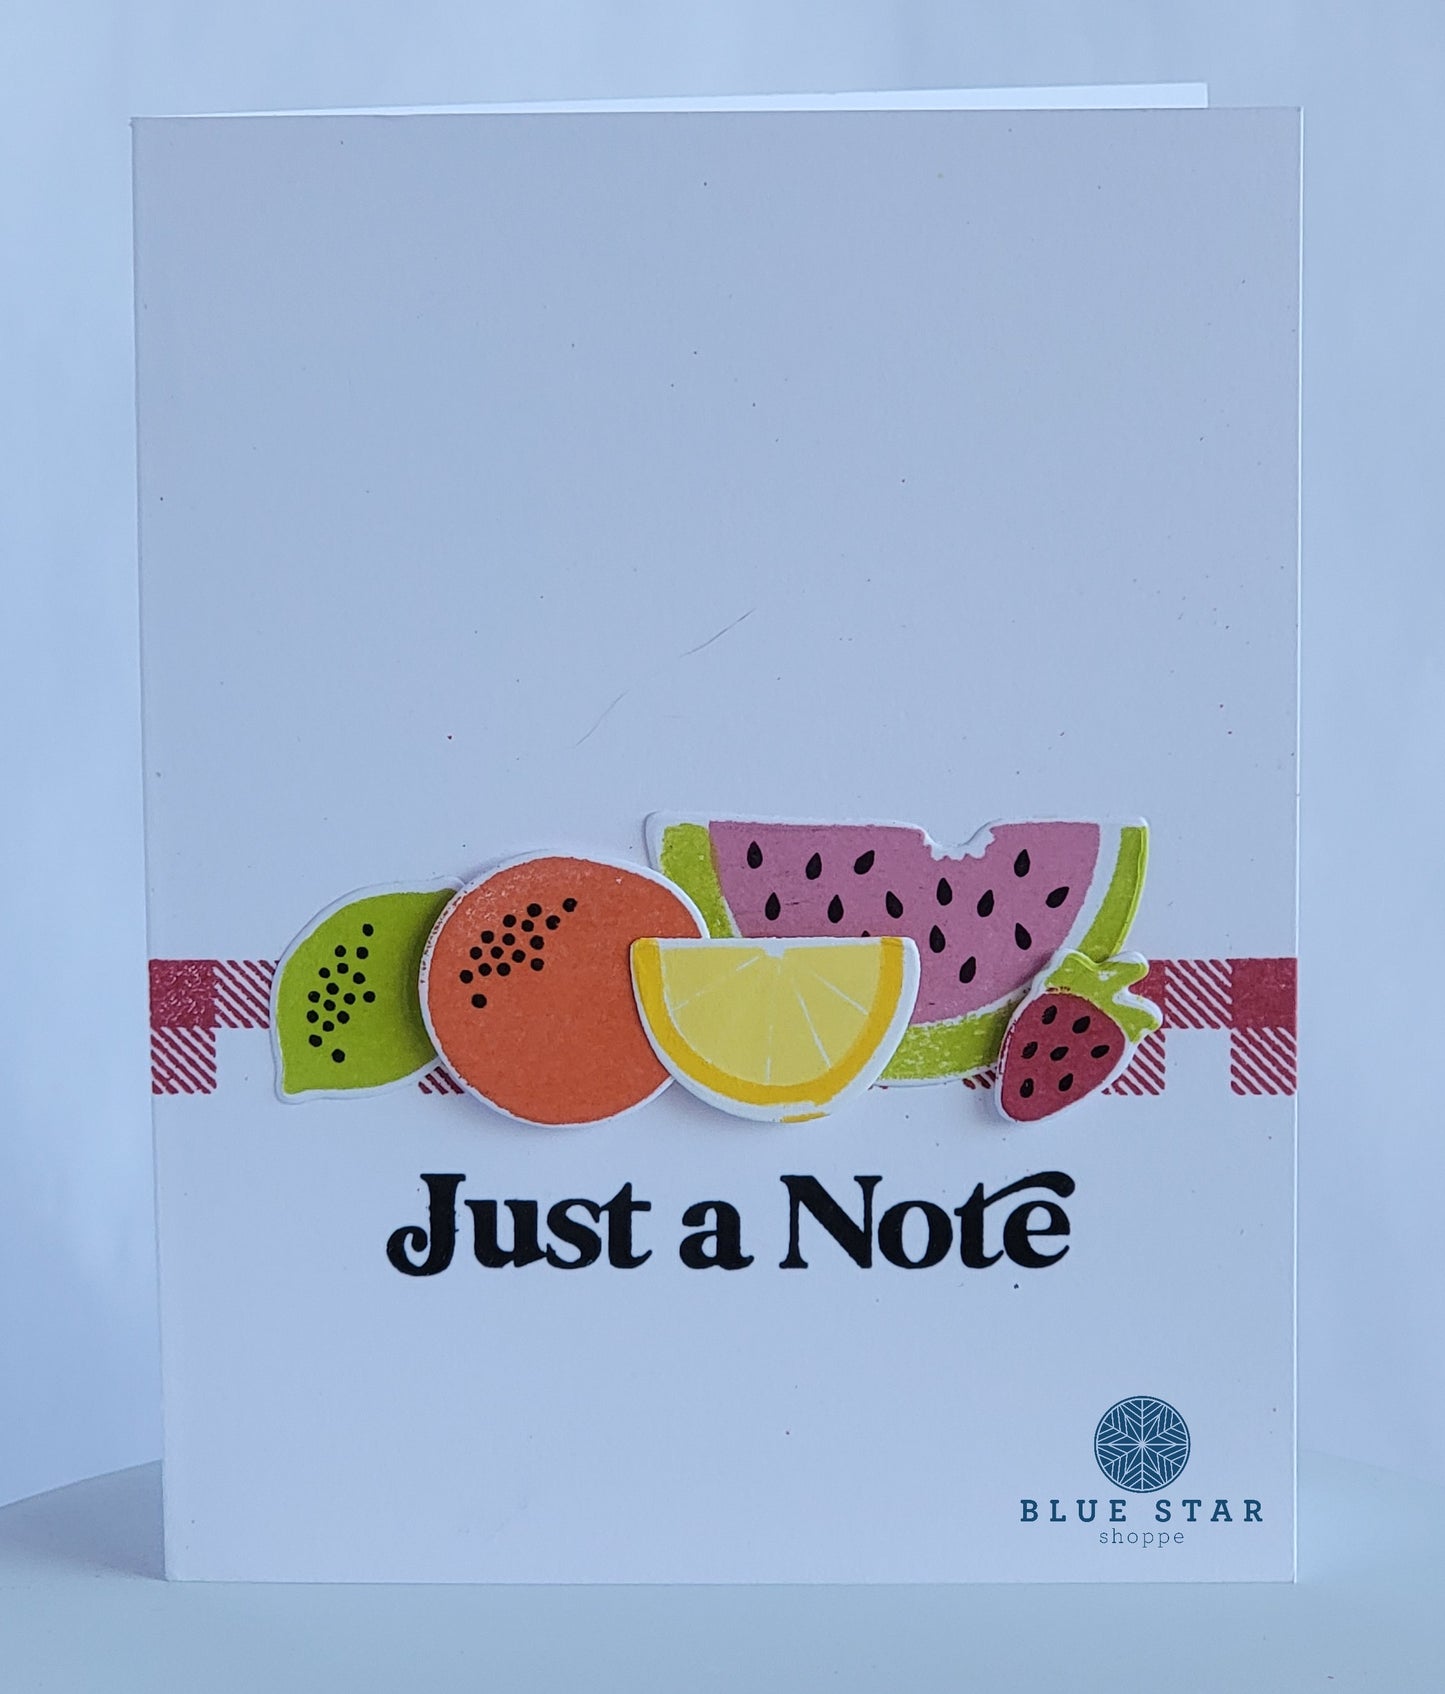 Just a Note - clean and simple fruit